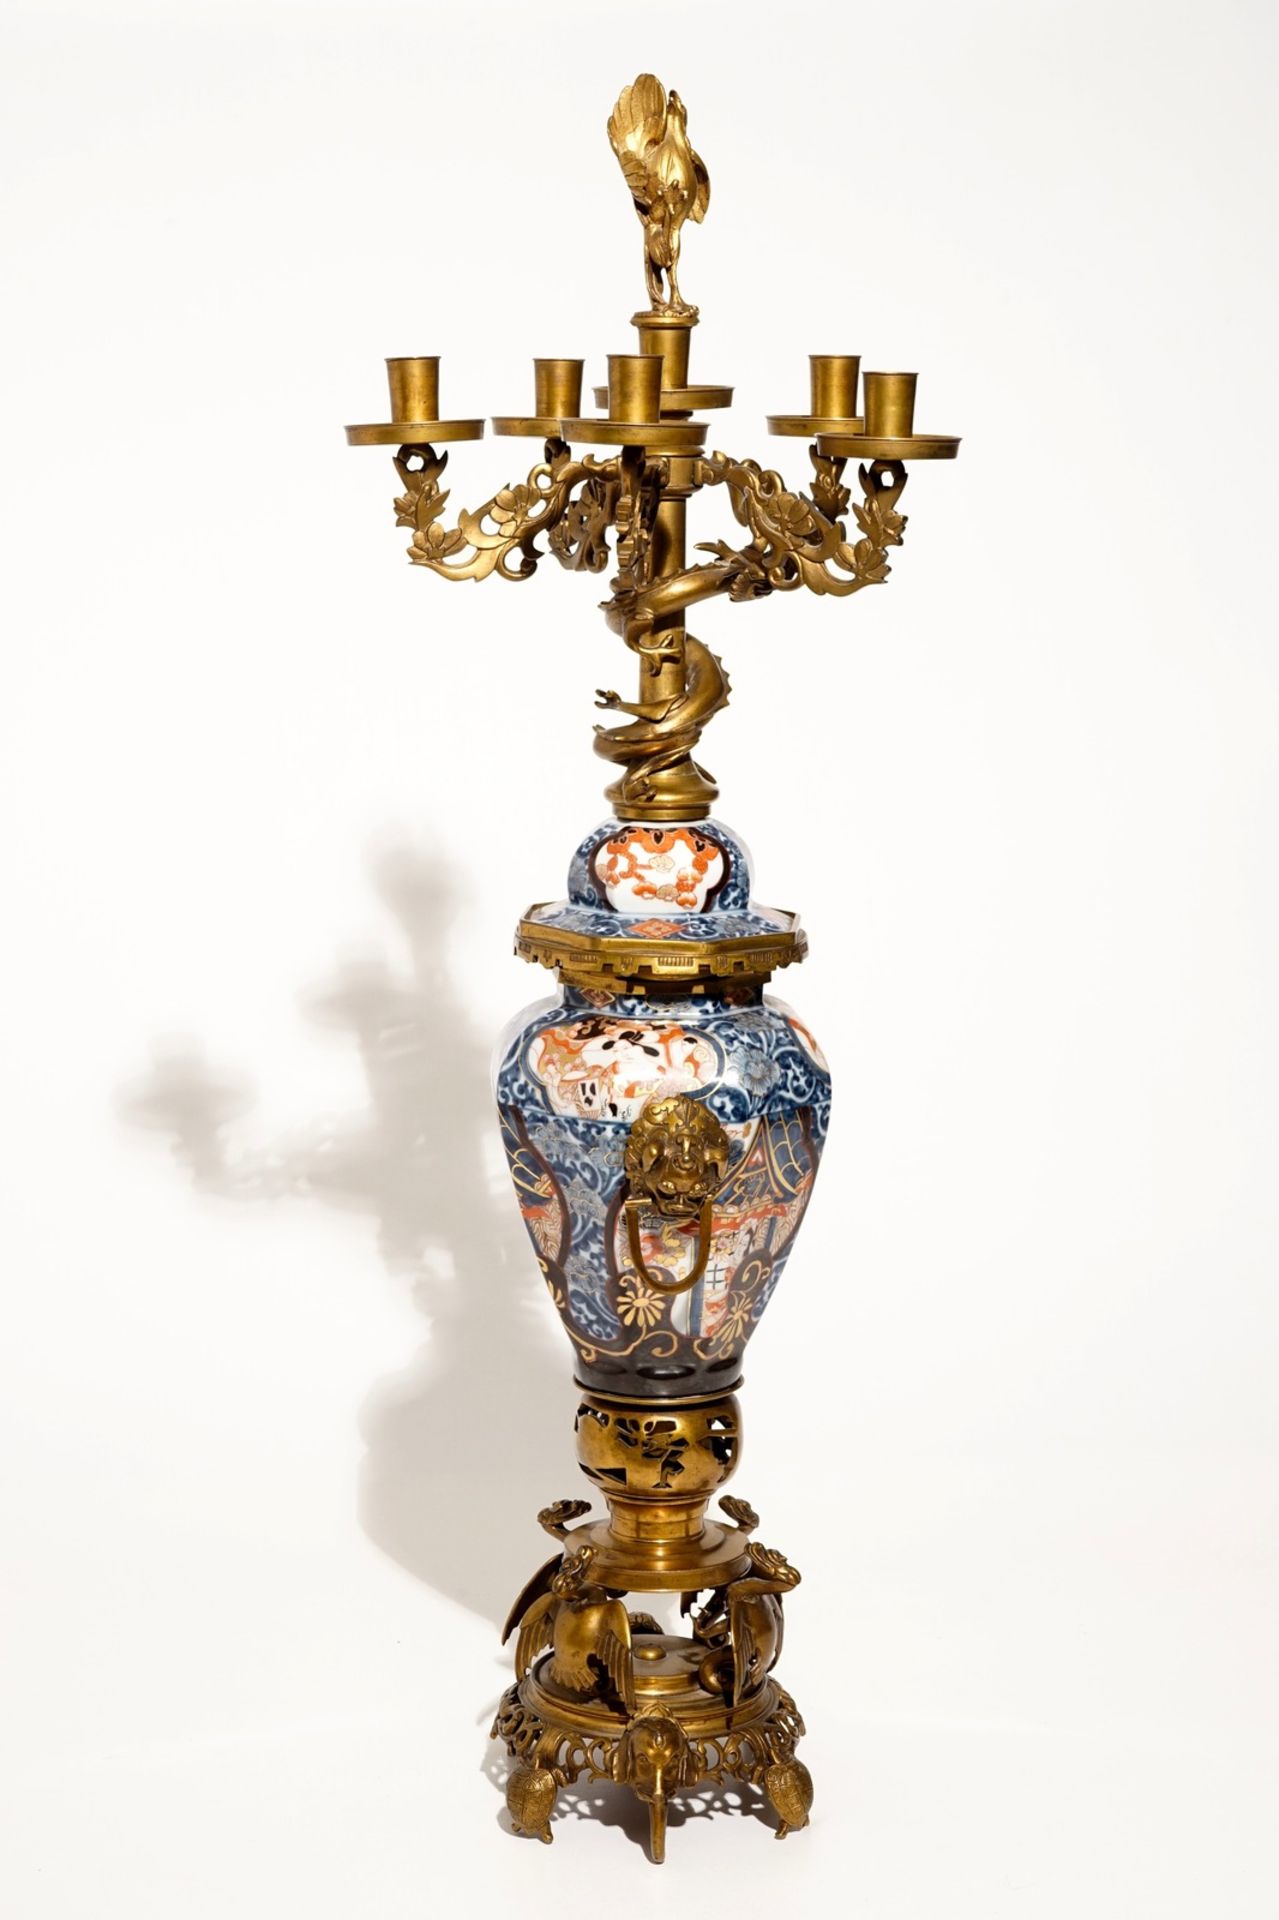 A large brass and gilt bronze-mounted Japanese Imari vase and cover candelabra, 19th C. - Image 4 of 6